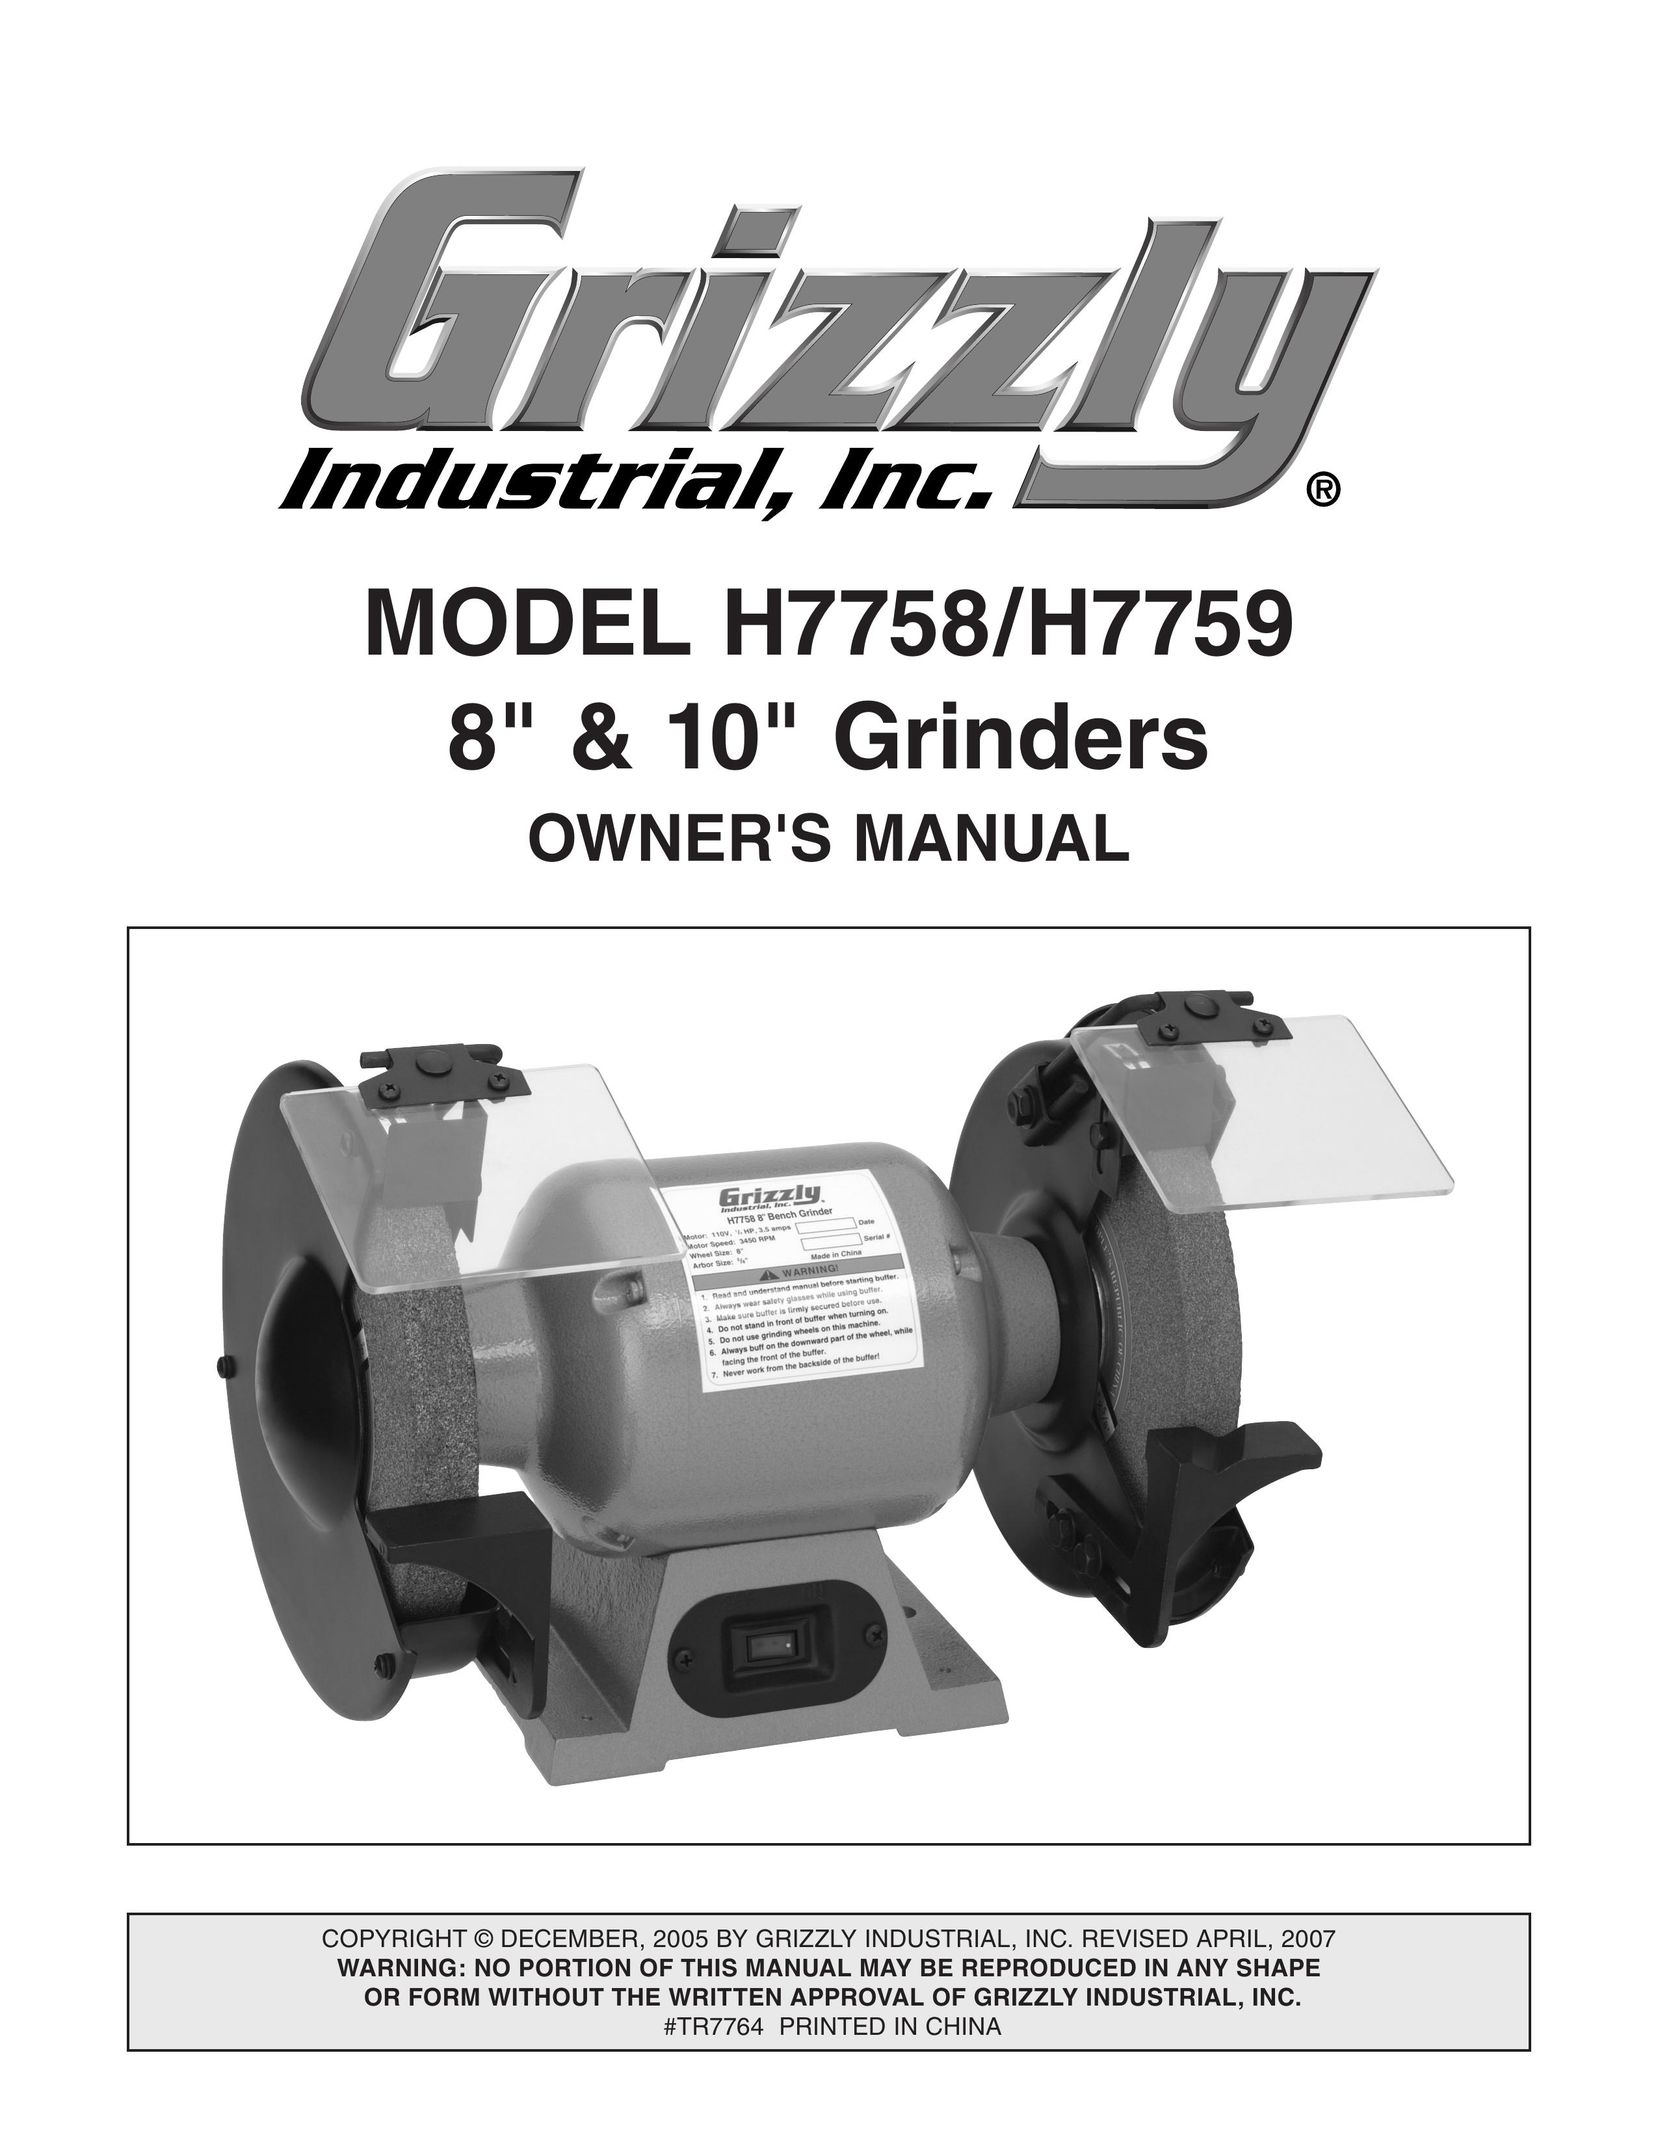 Grizzly H7759 Grinder User Manual